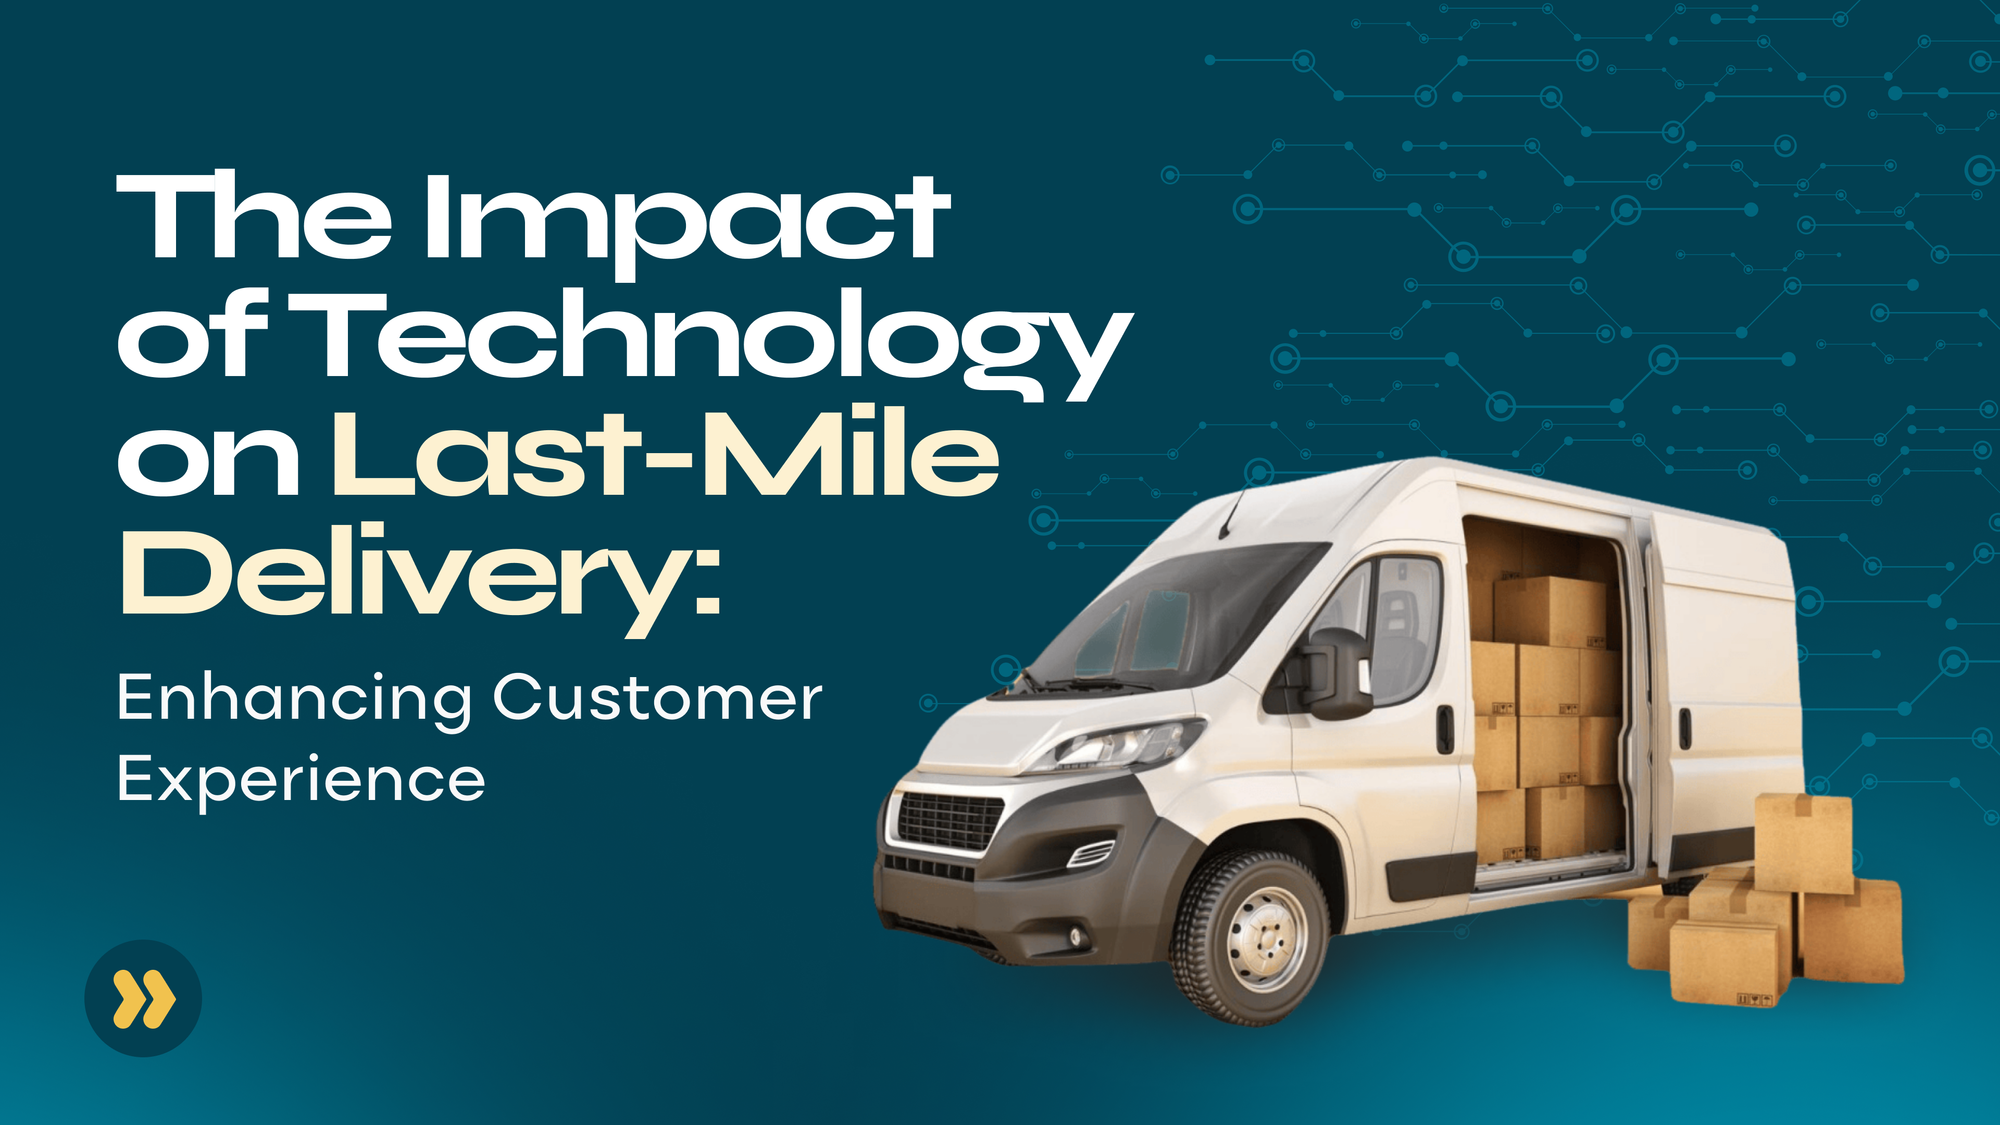 The Impact of Technology on Last-Mile Delivery: Enhancing Customer Experience